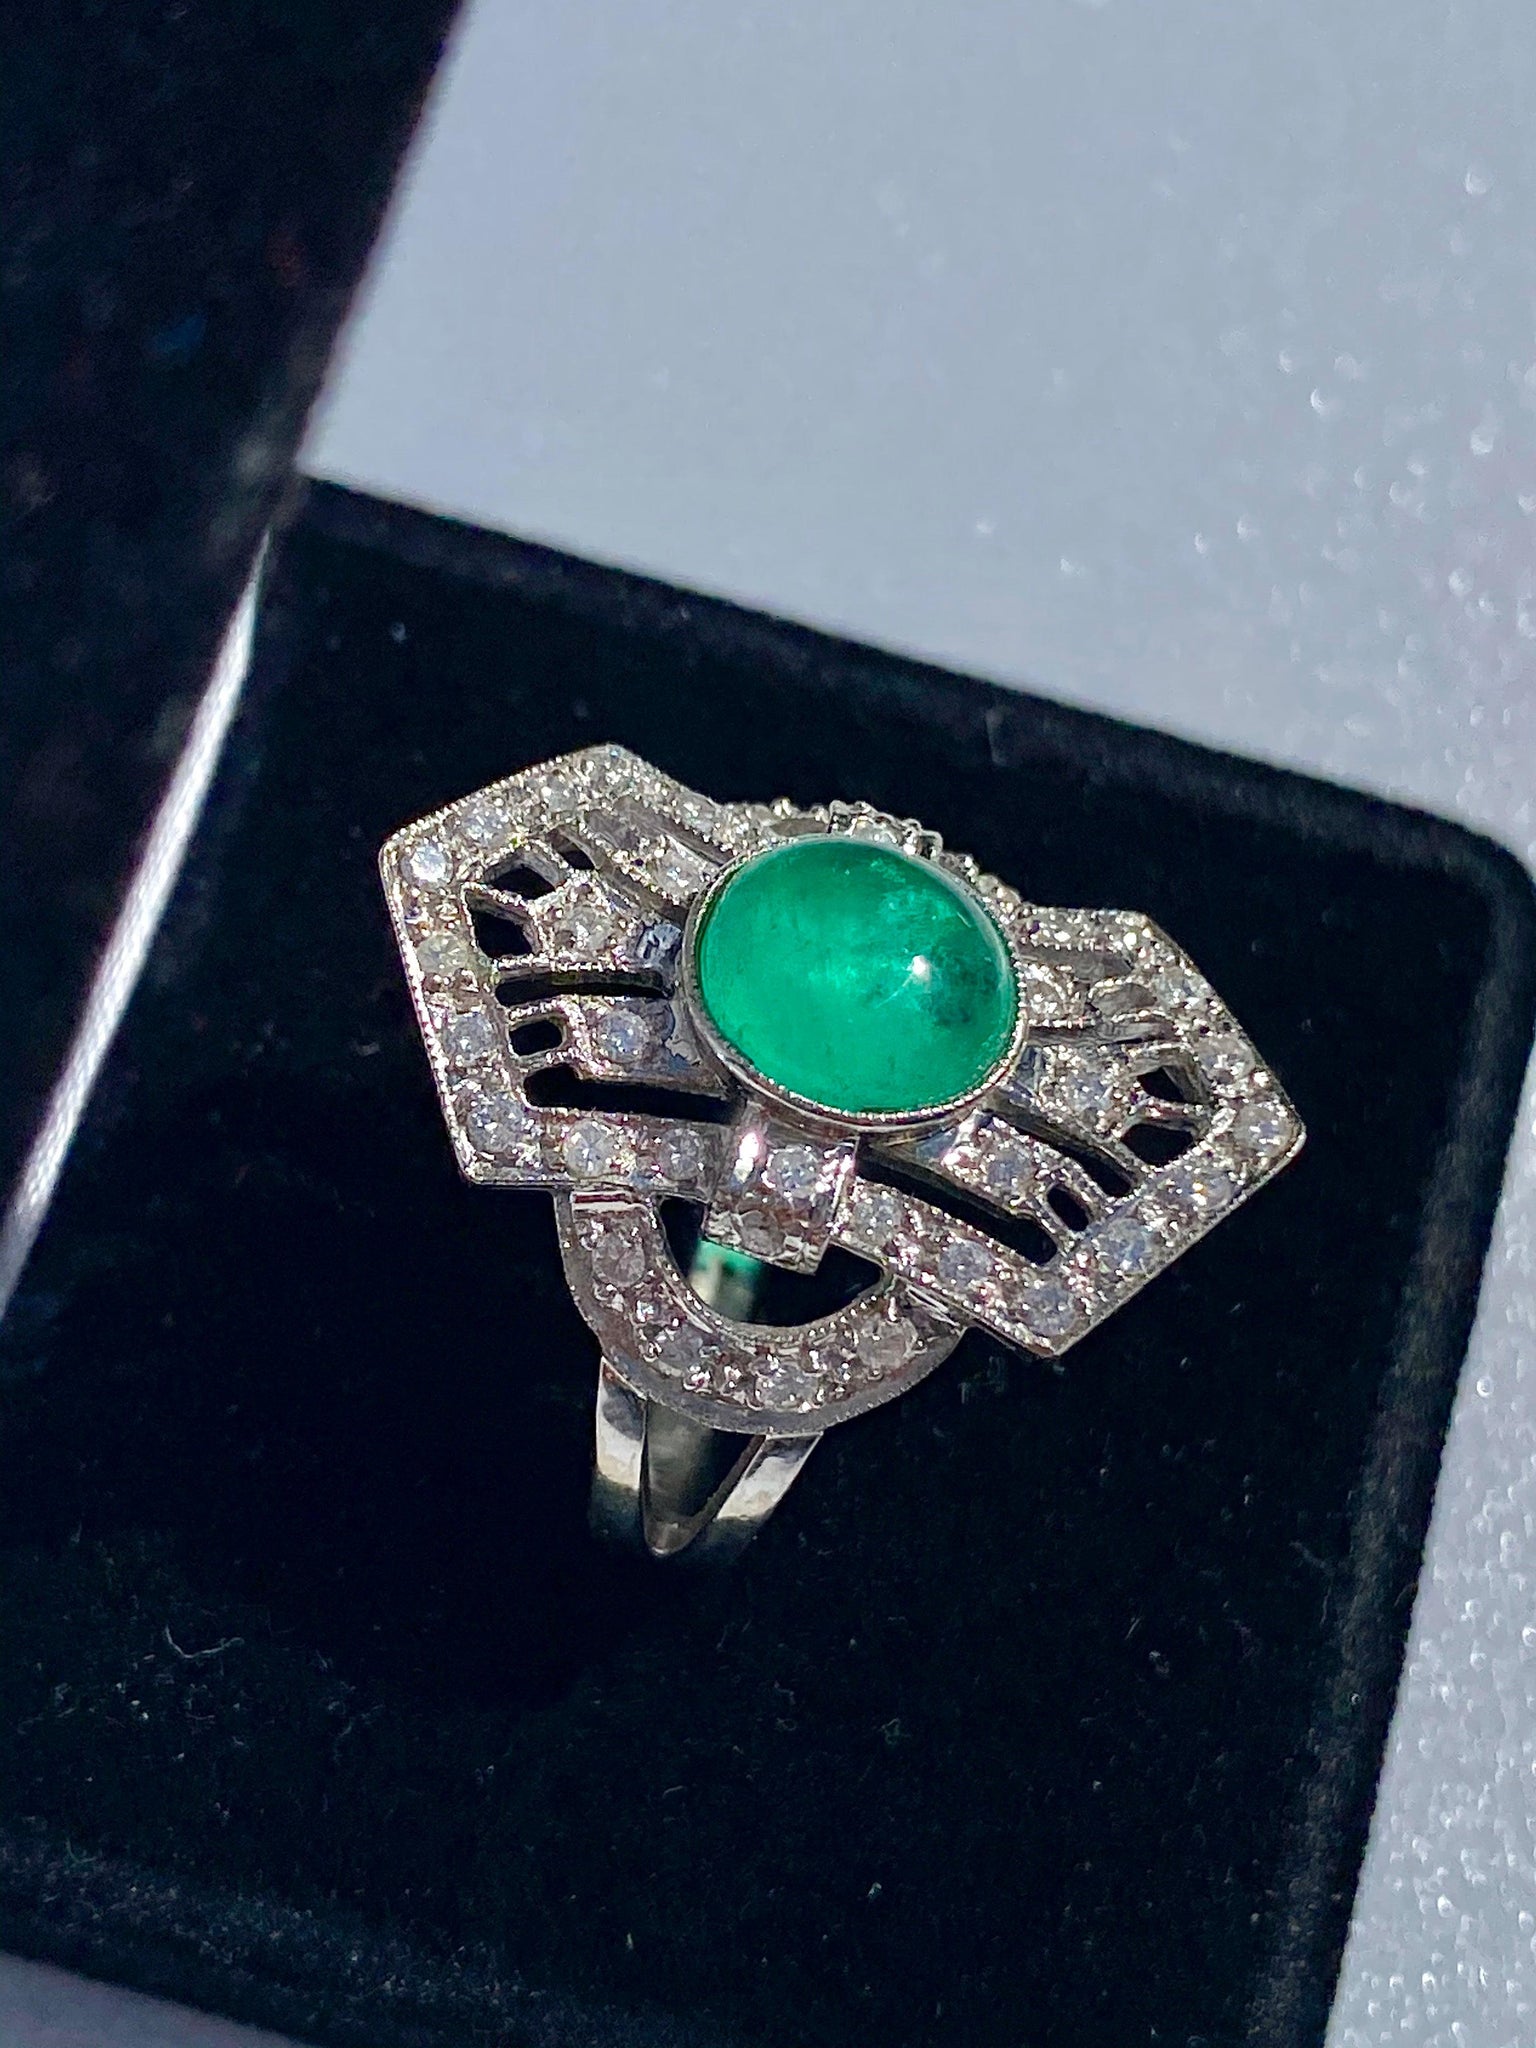 Cabochon Cut Natural Emerald Ring in Art Deco inspired Vintage White Gold Setting - ASSAY